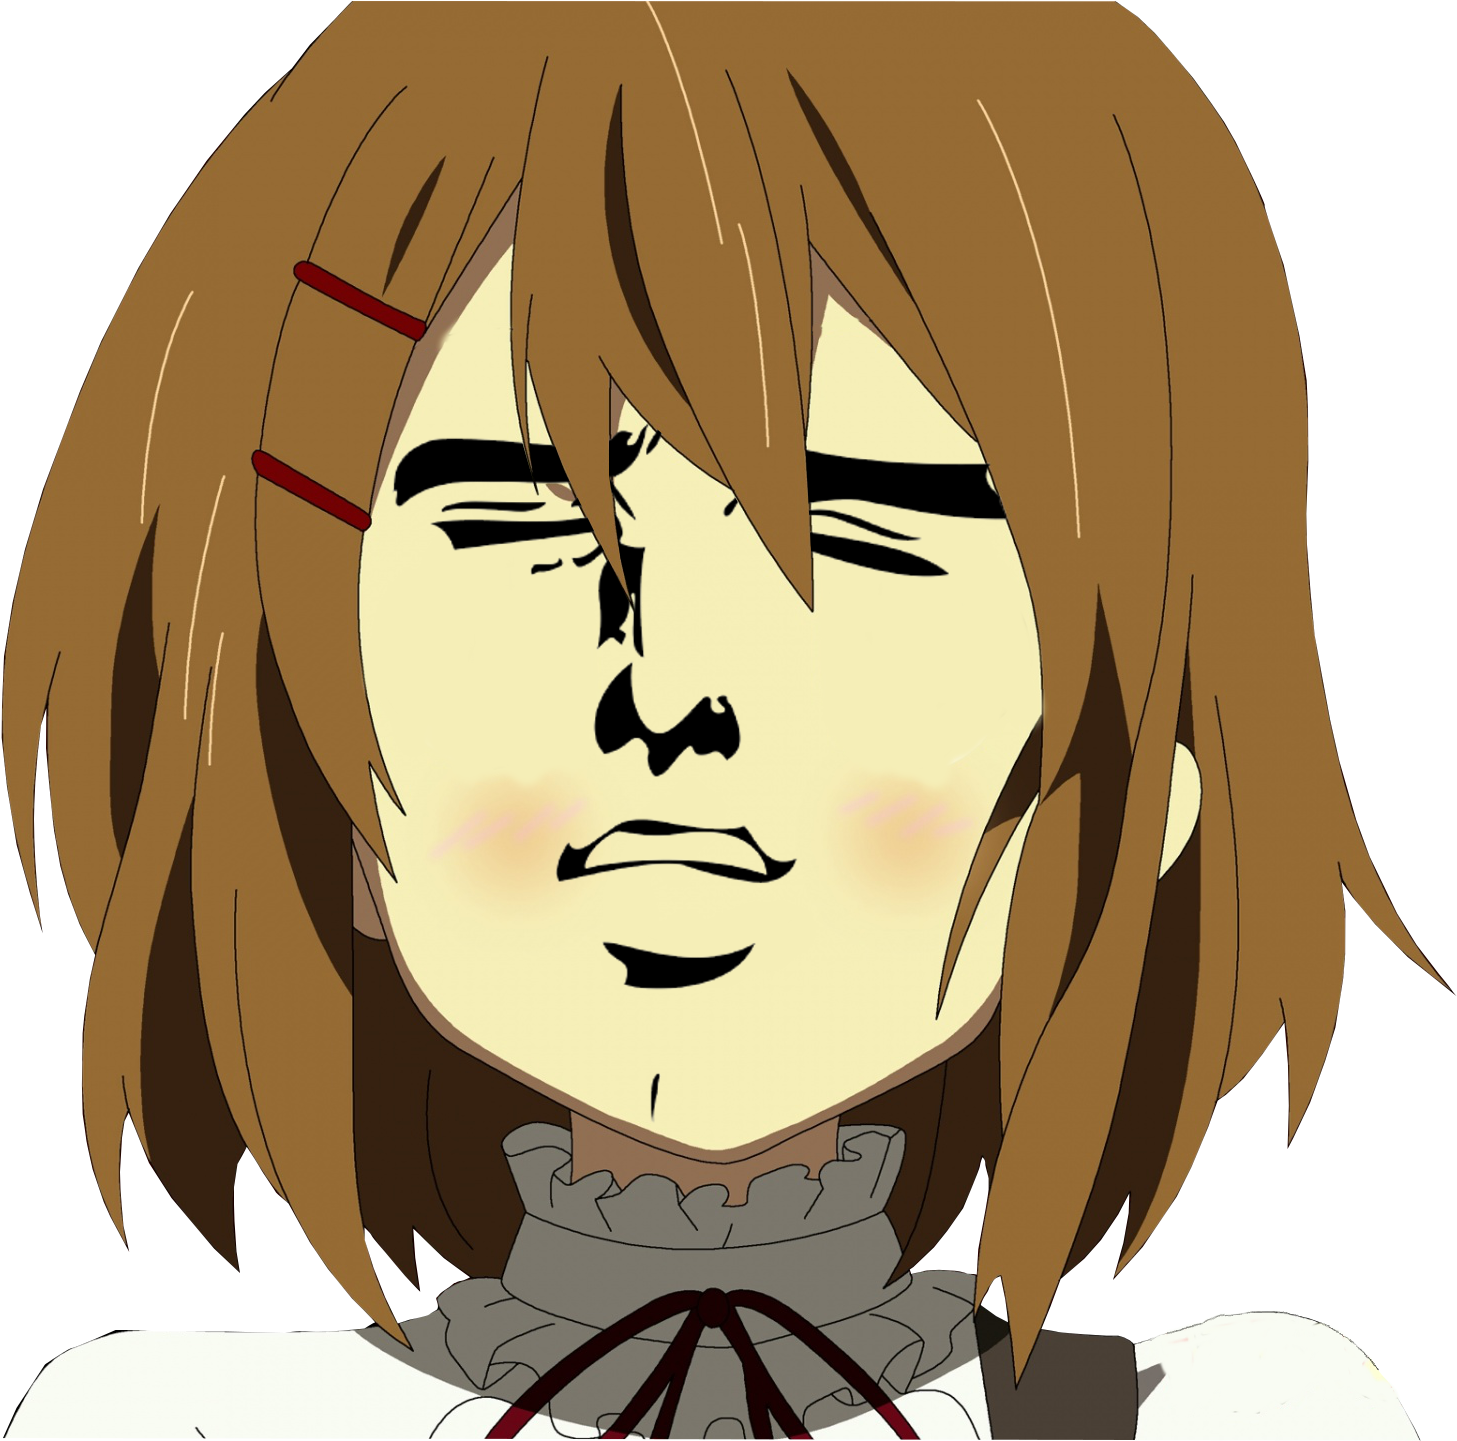 Anime Face Meme Png : Download free anime face png with transparent